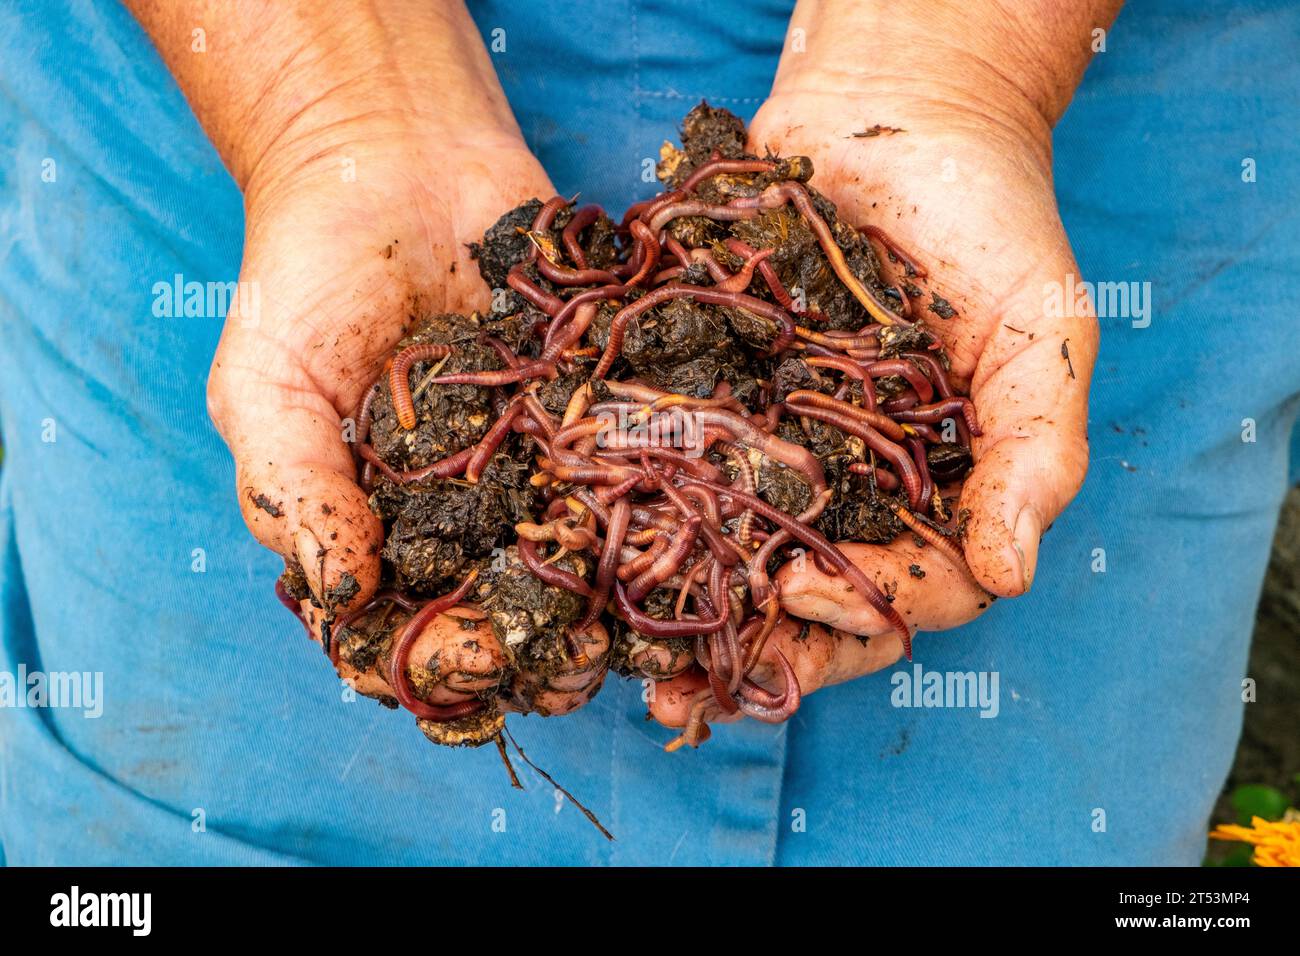 Vermiculture in organic gardening. A gardener with two hands full of compost worms. Stock Photo